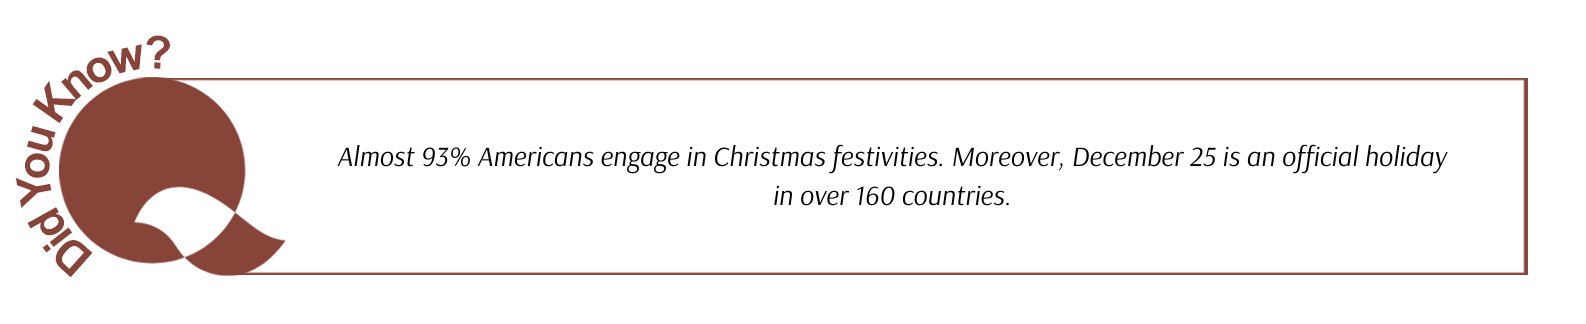 Did you know: Almost 93% Americans engage in Christmas festivities. Moreover, December 25 is an official holiday in over 160 countries.